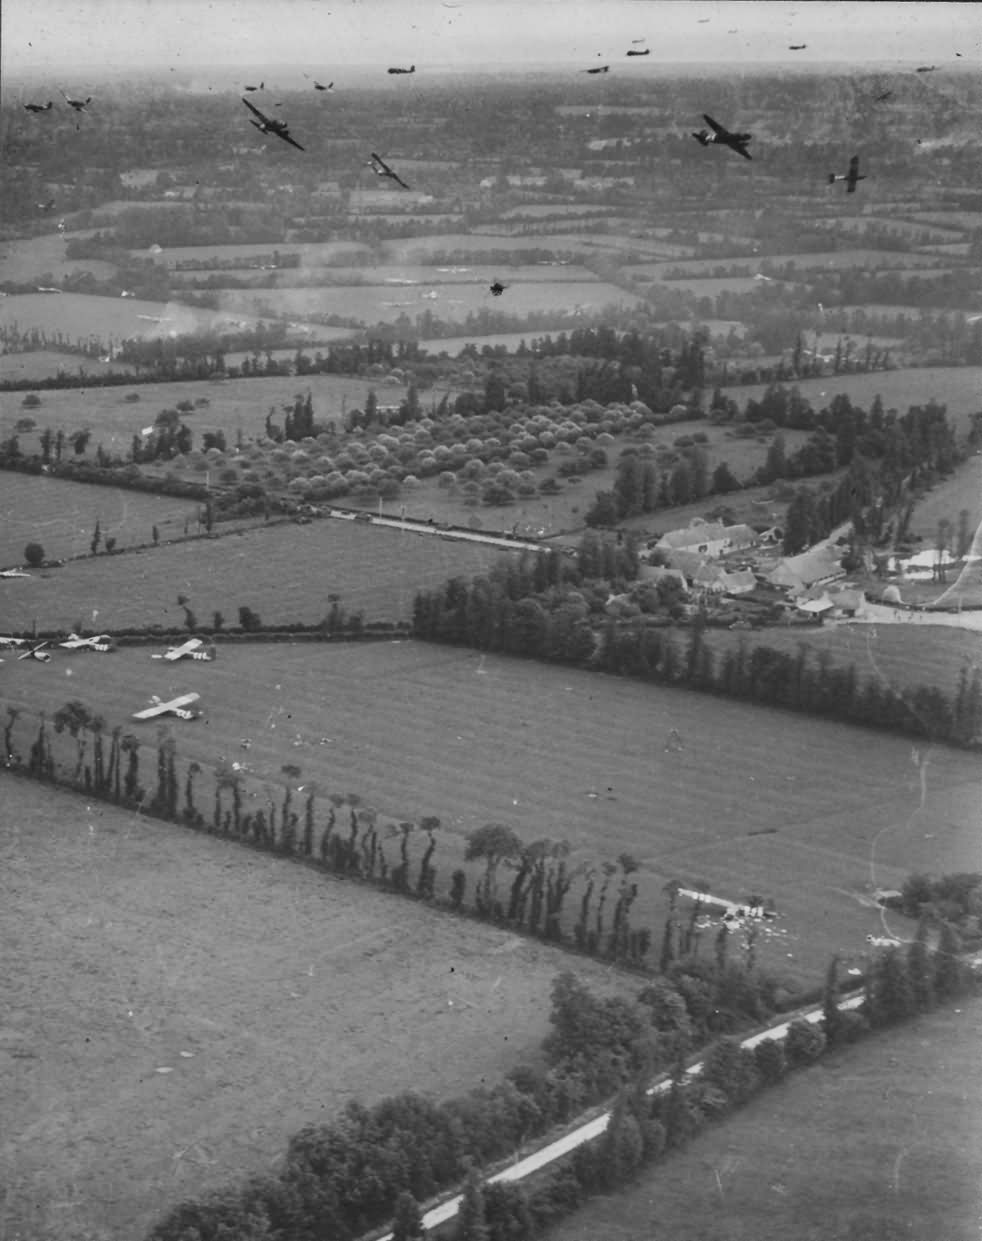 Gliders_Near_Cherbourg_France_D-Day_Normandy_6_June_1944